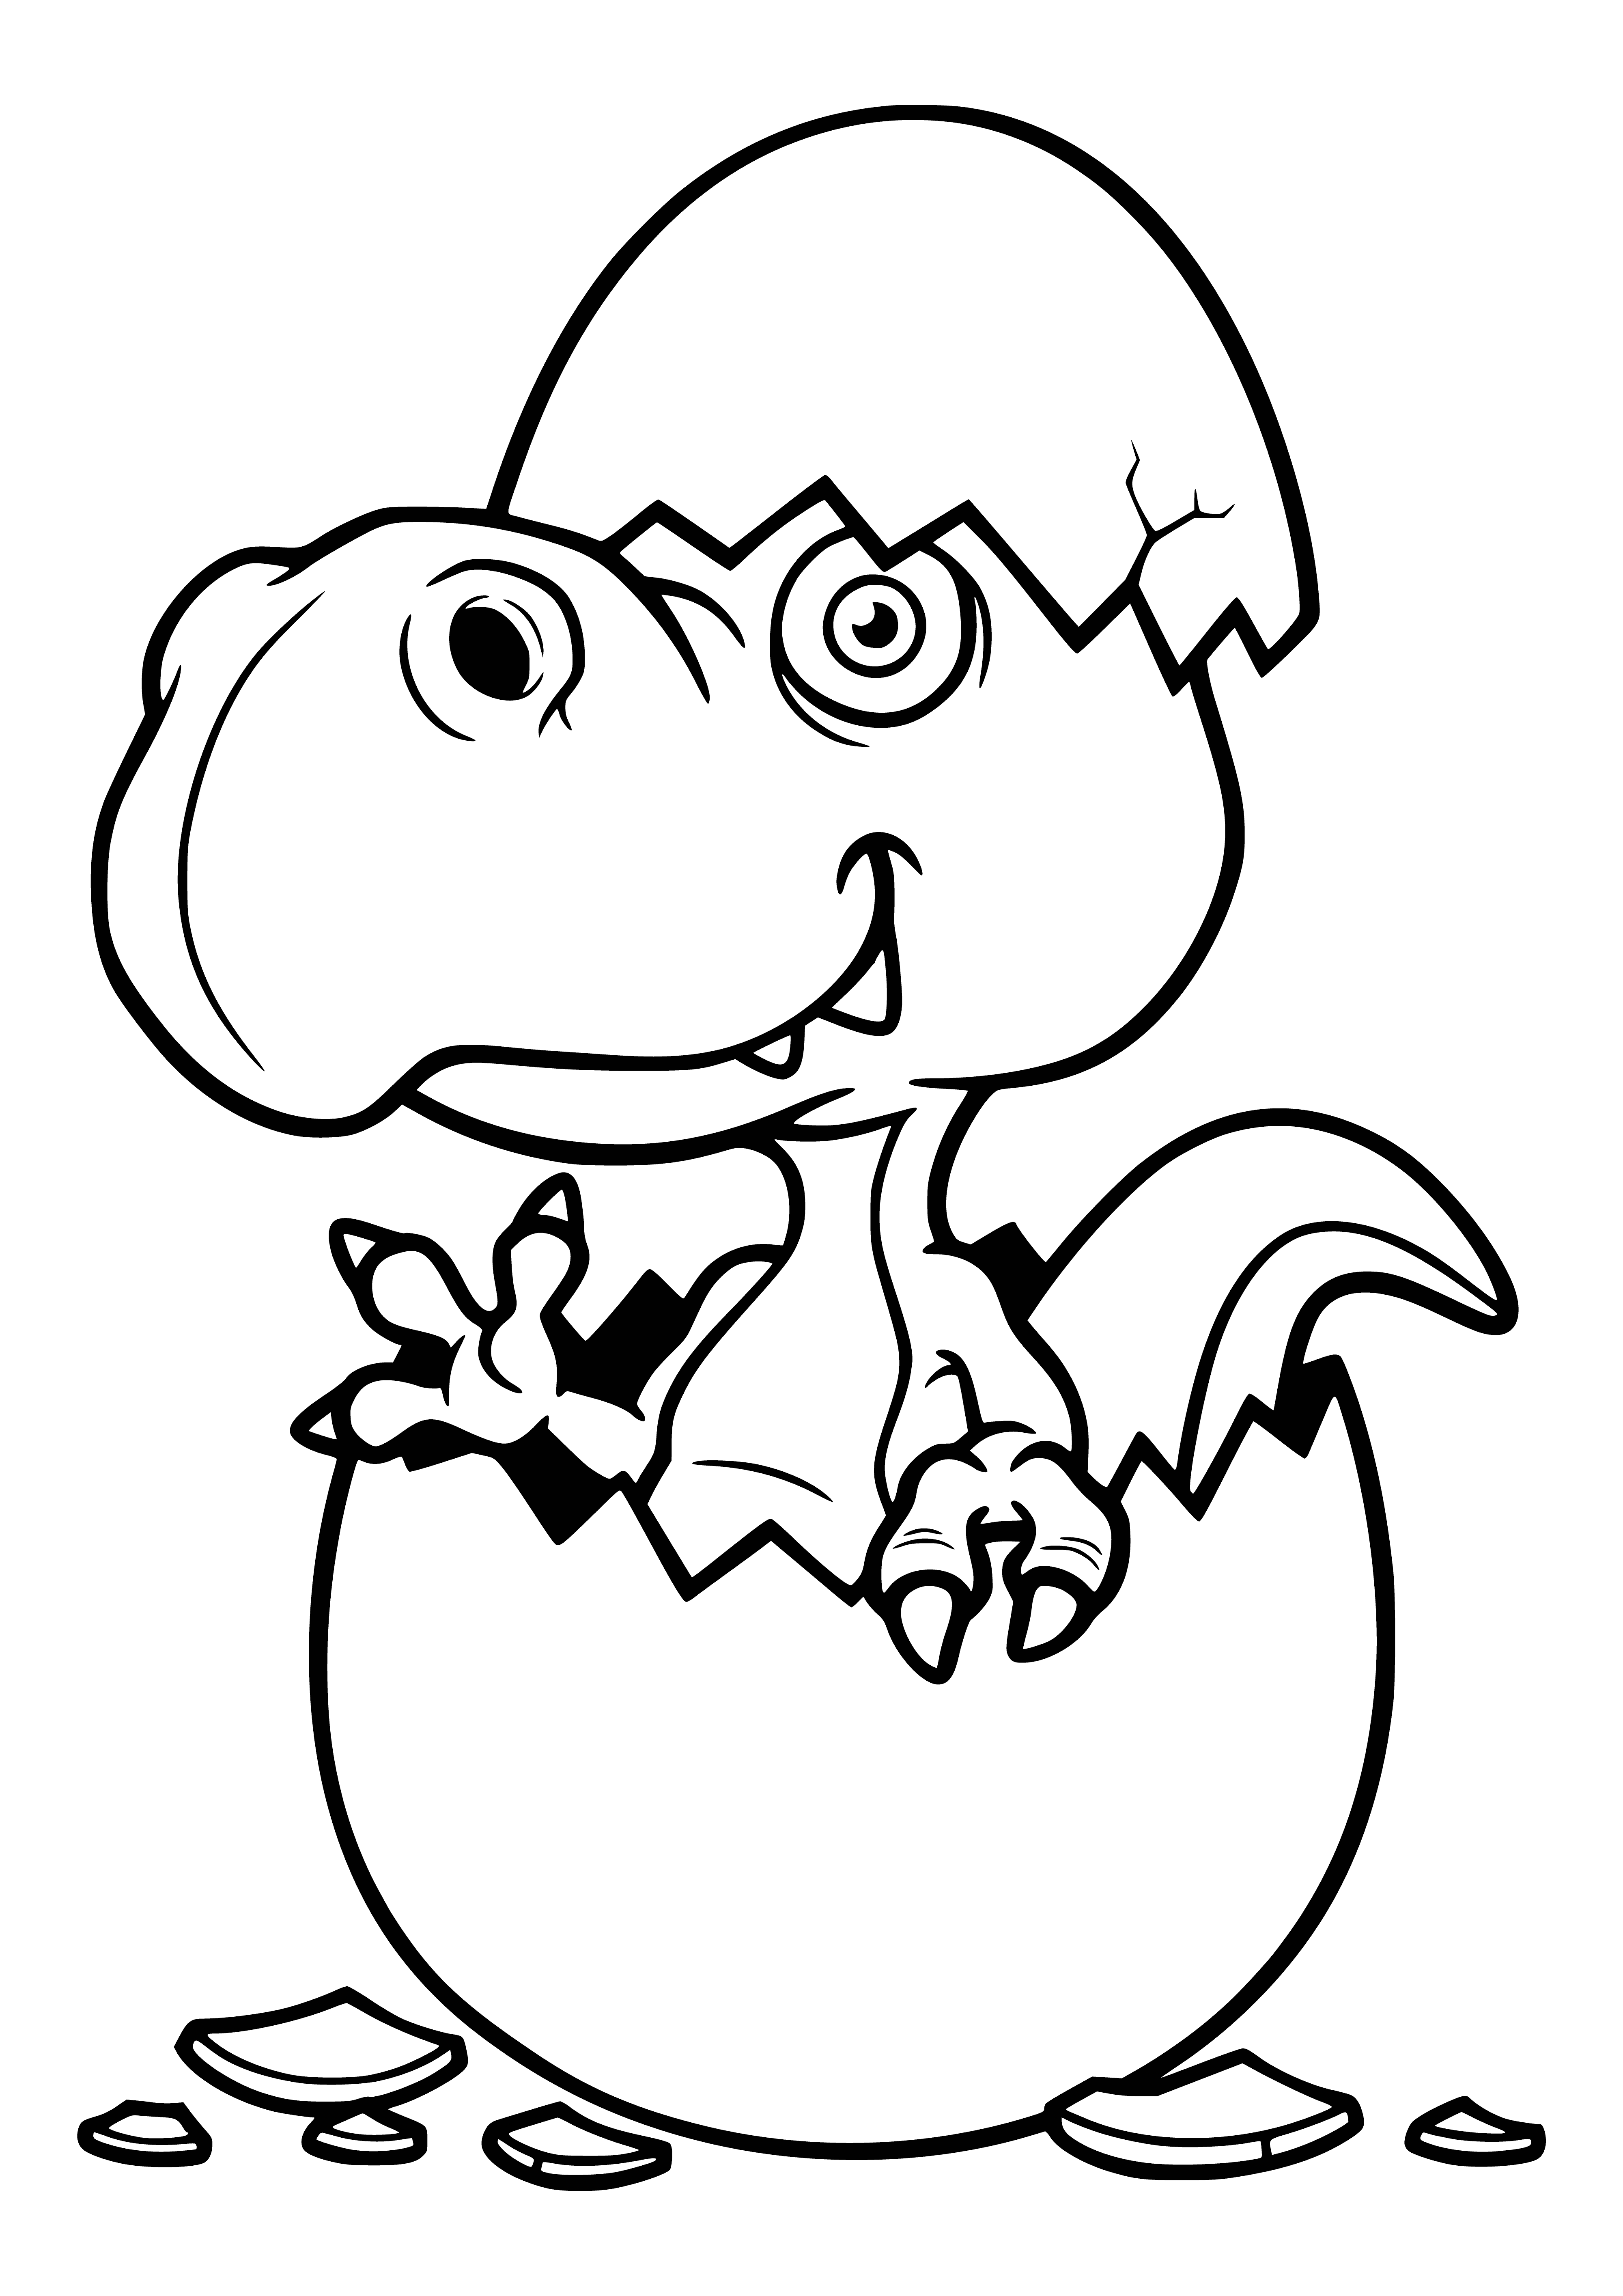 coloring page: A baby T-Rex is hatching from an egg! It has wet, greenish-grey skin and its small limbs are tucked close to its body.